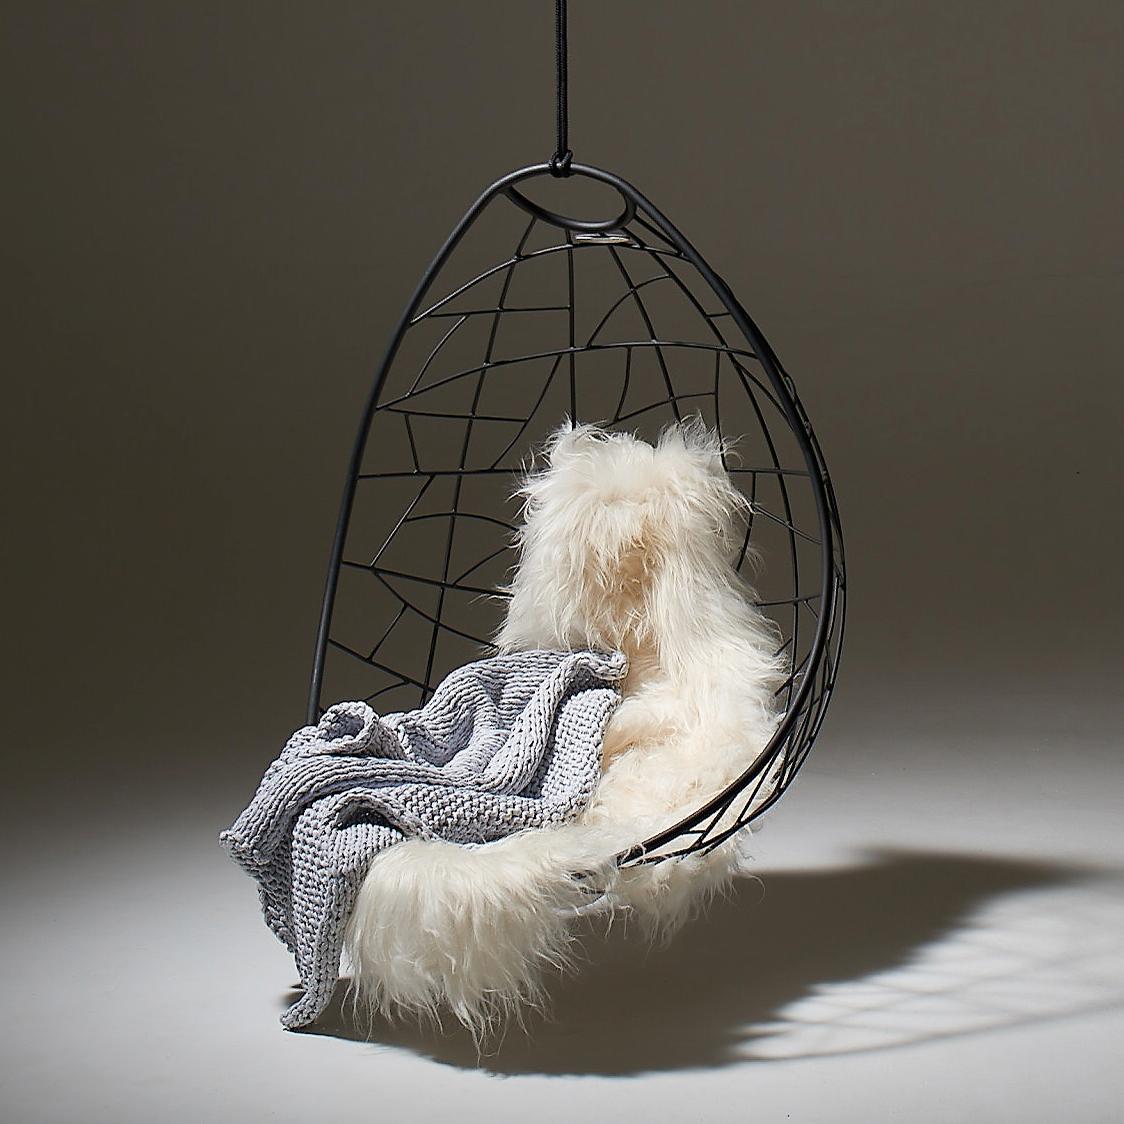 Nest Egg Hanging Swing Chair Steel Modern In/Outdoor 21st Century White Twig In New Condition For Sale In Johannesburg, ZA